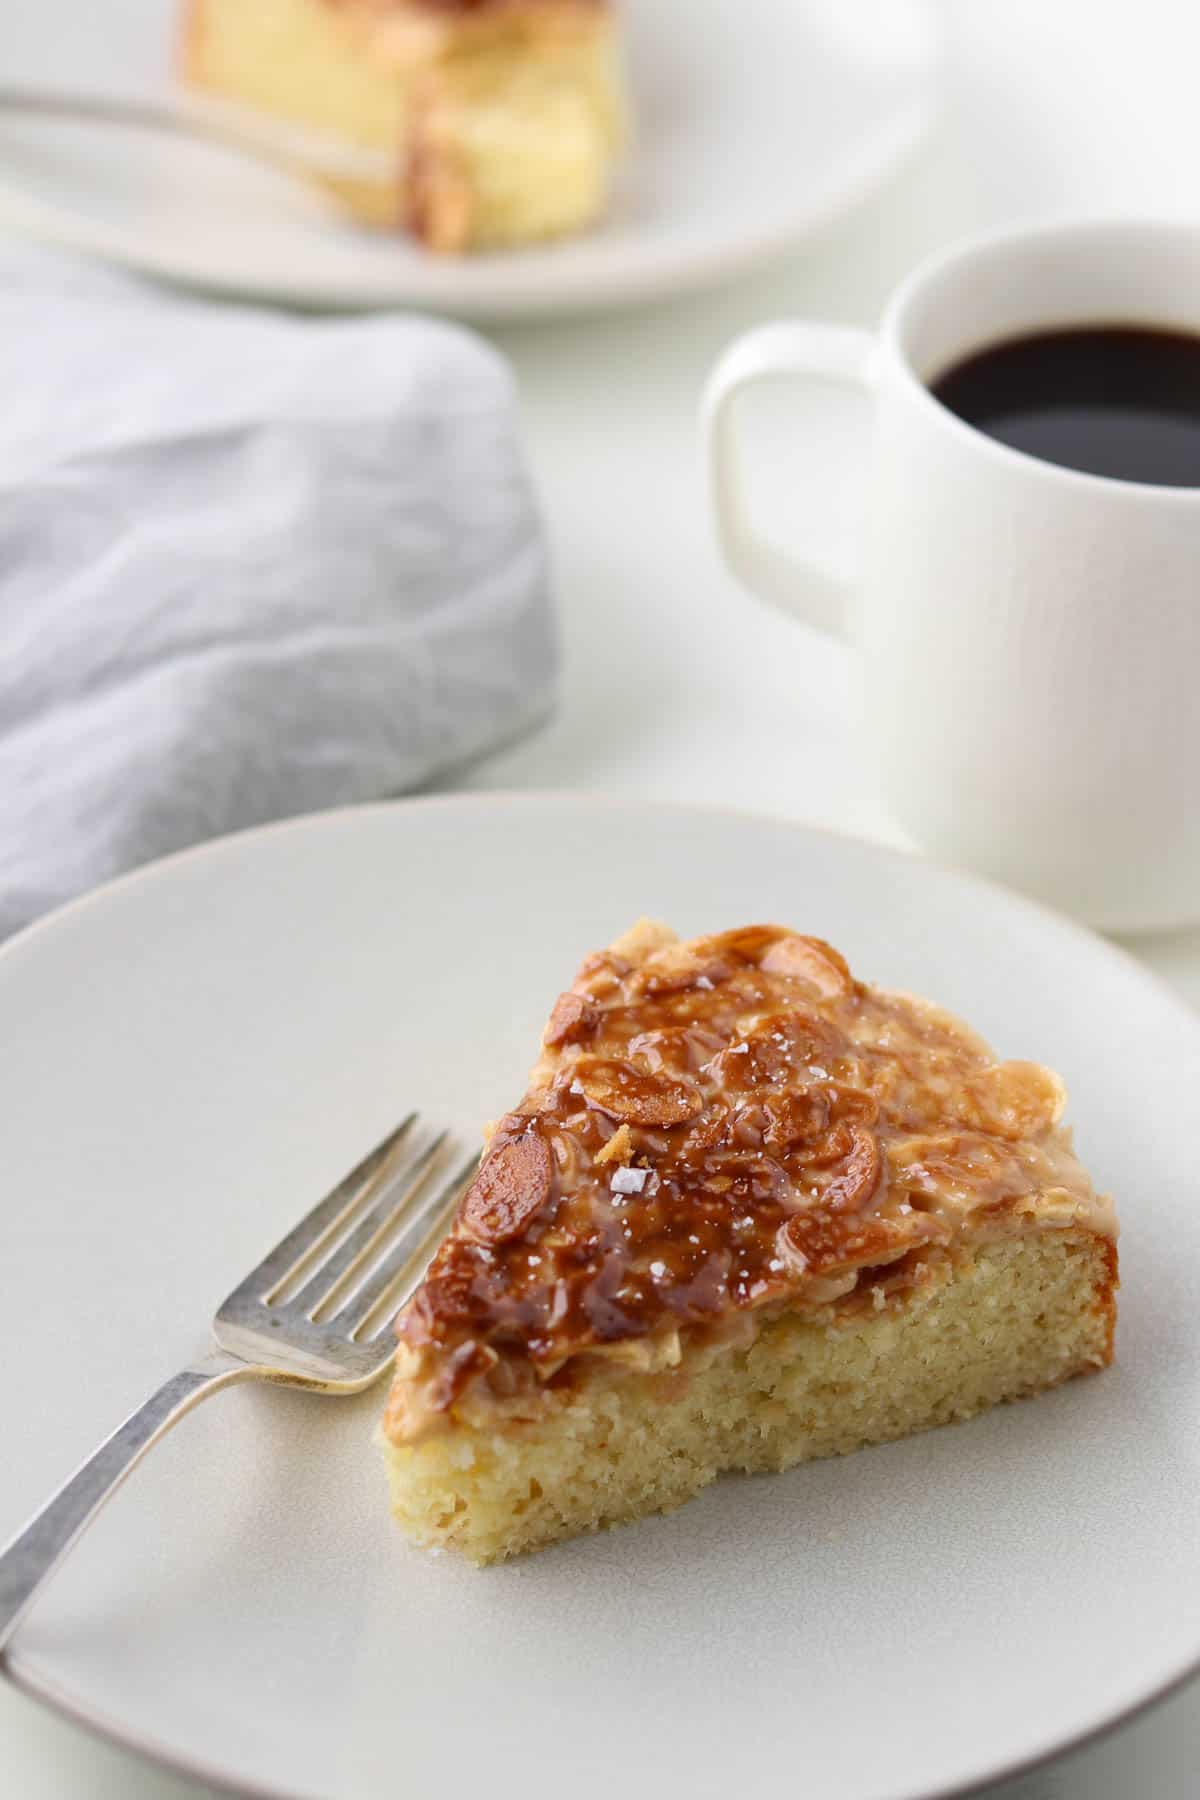 A slice of cake topped with caramelized onions next to a fork and a cup of coffee.